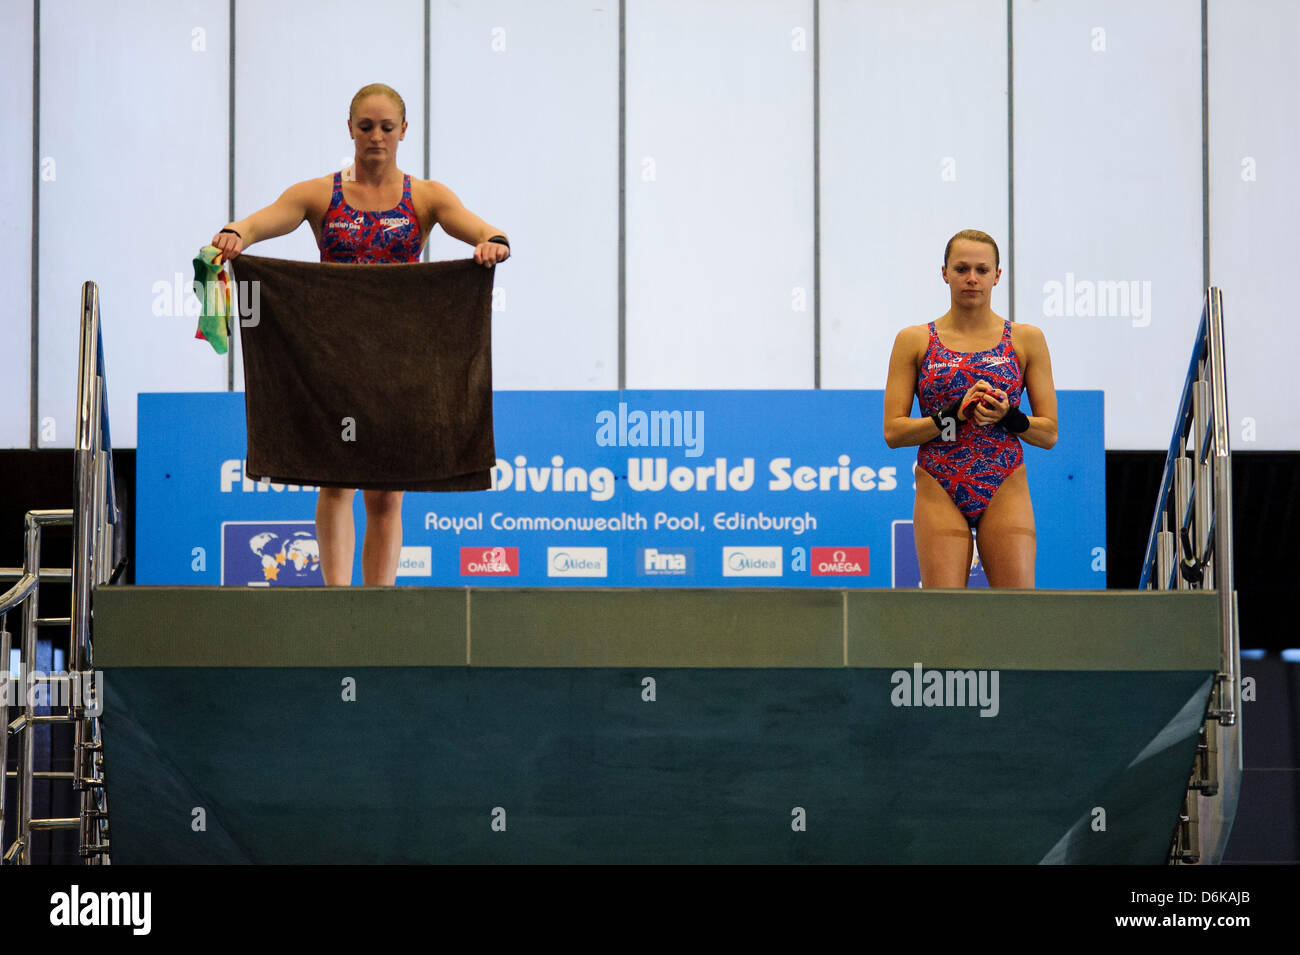 Edinburgh, UK. 19th April, 2013. Tonia Couch &amp; Sarah Barrow of Great Britain (GBR) in action during the during the Womens 10m Synchronised Platform Final on Day 1 of the FINA/Midea Diving World Series 2013 at the Royal Commonwealth Pool in Edinburgh. Stock Photo